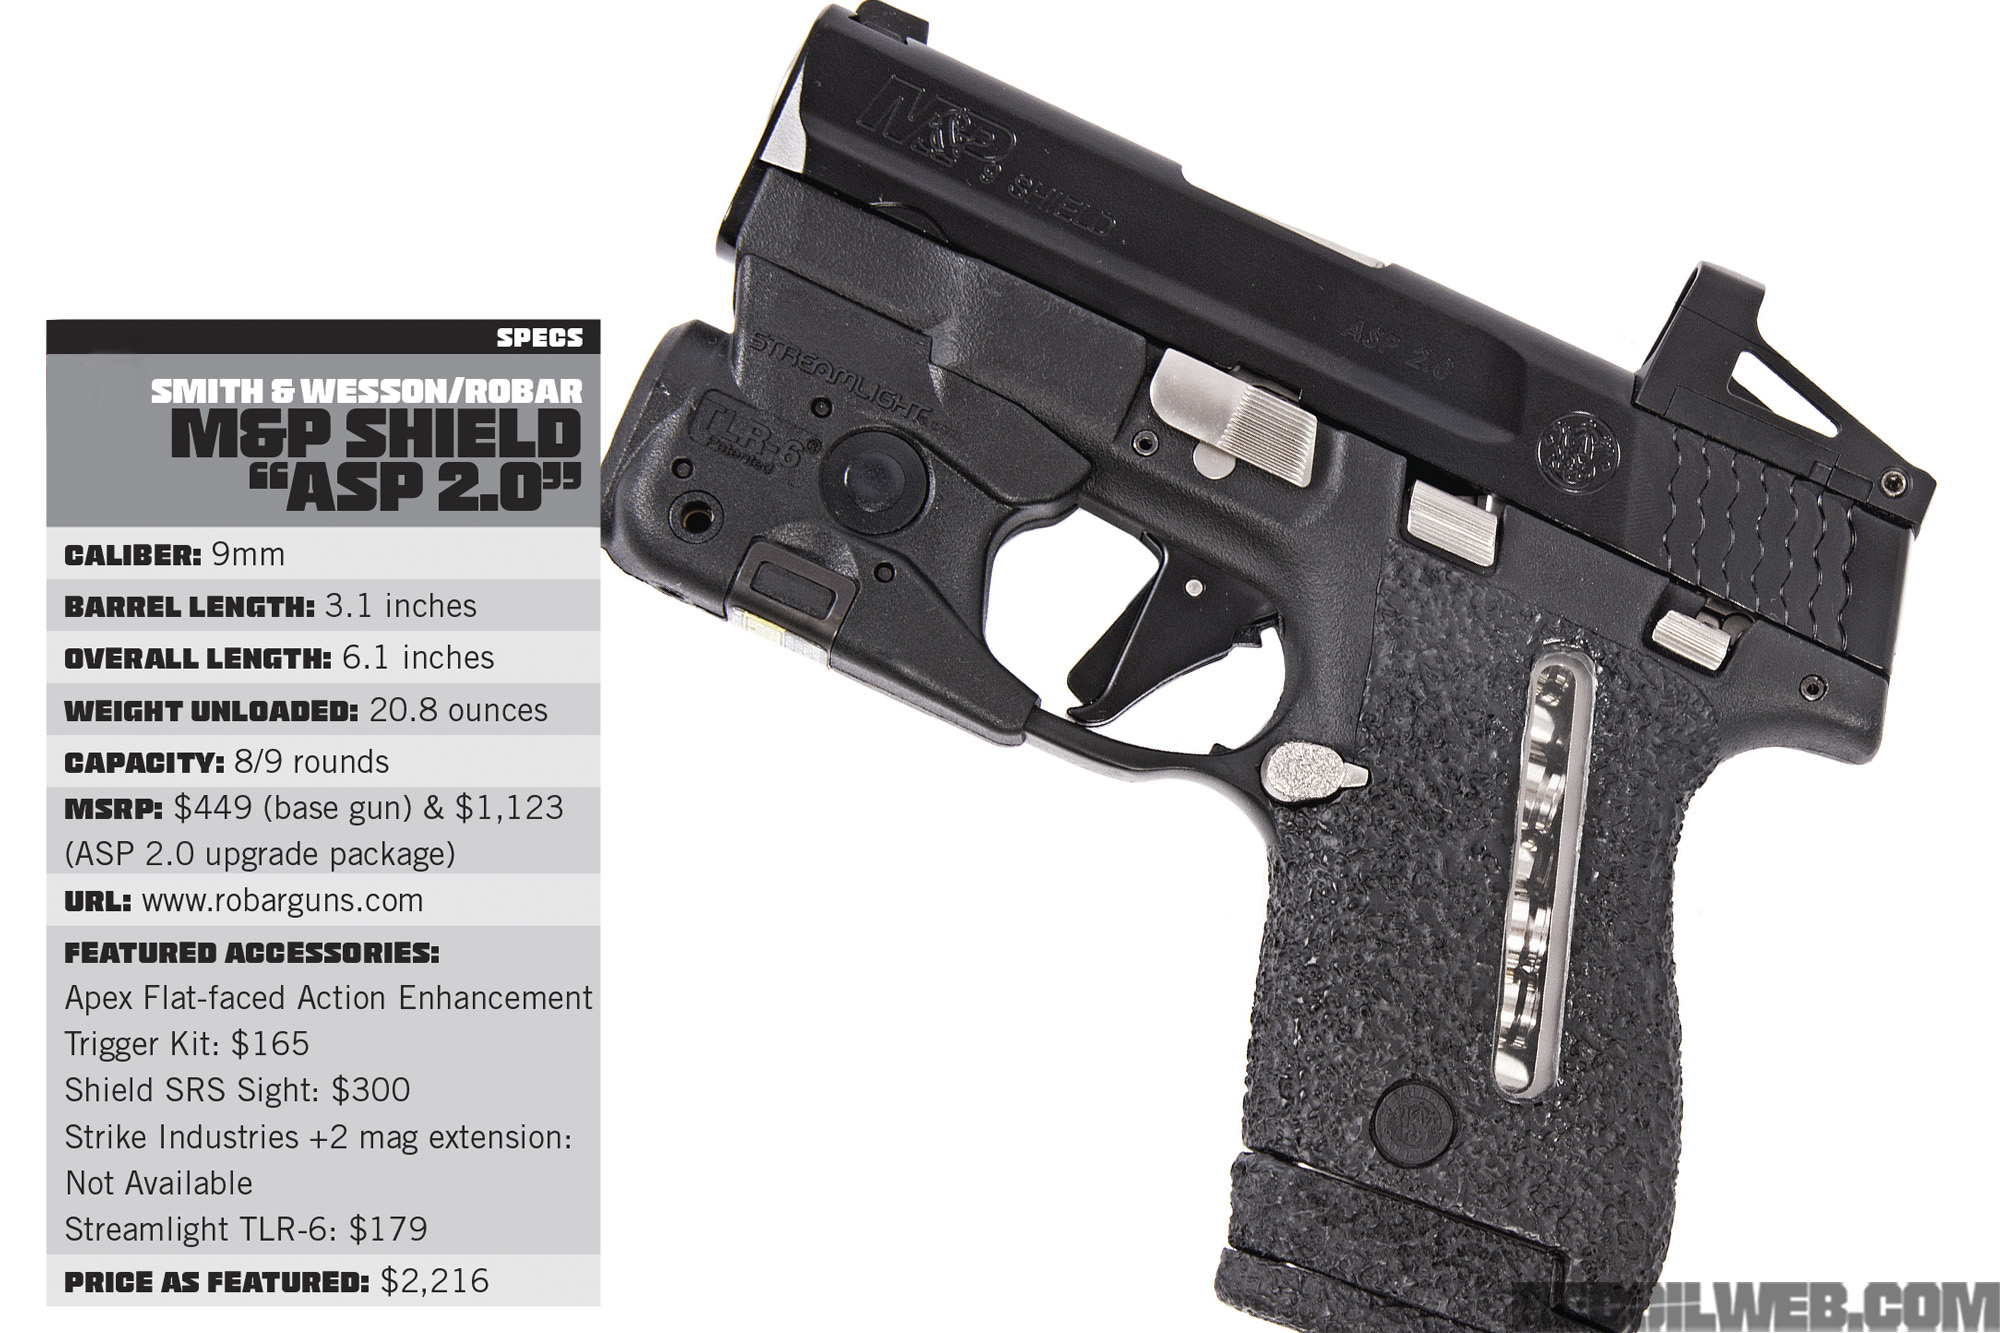 After all that, we slapped on a Streamlight TLR-6 subcompact weapon light. 